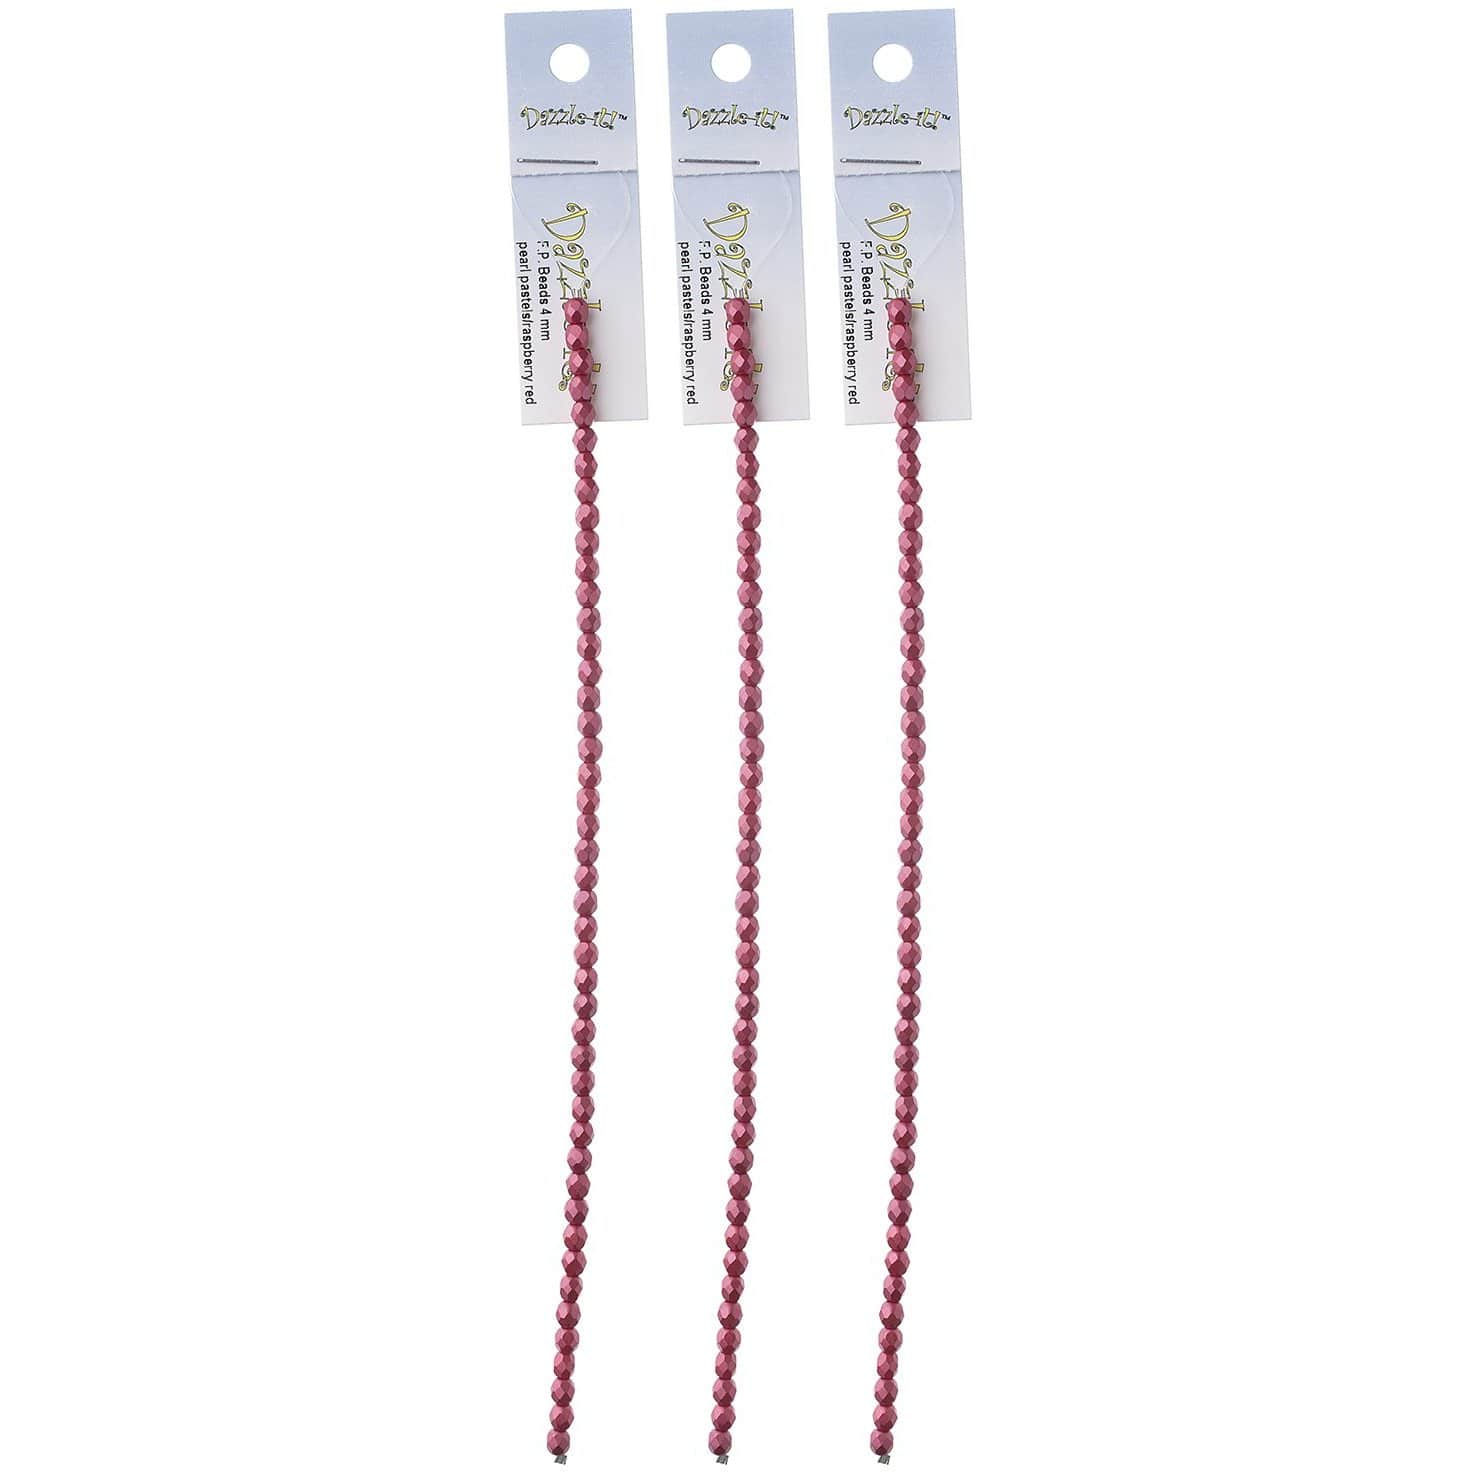 Sundaylace Creations & Bling Fire Polished Beads 4mm Pearl Pastels Raspberry Red, Fire Polished Beads strung 45pcs/string